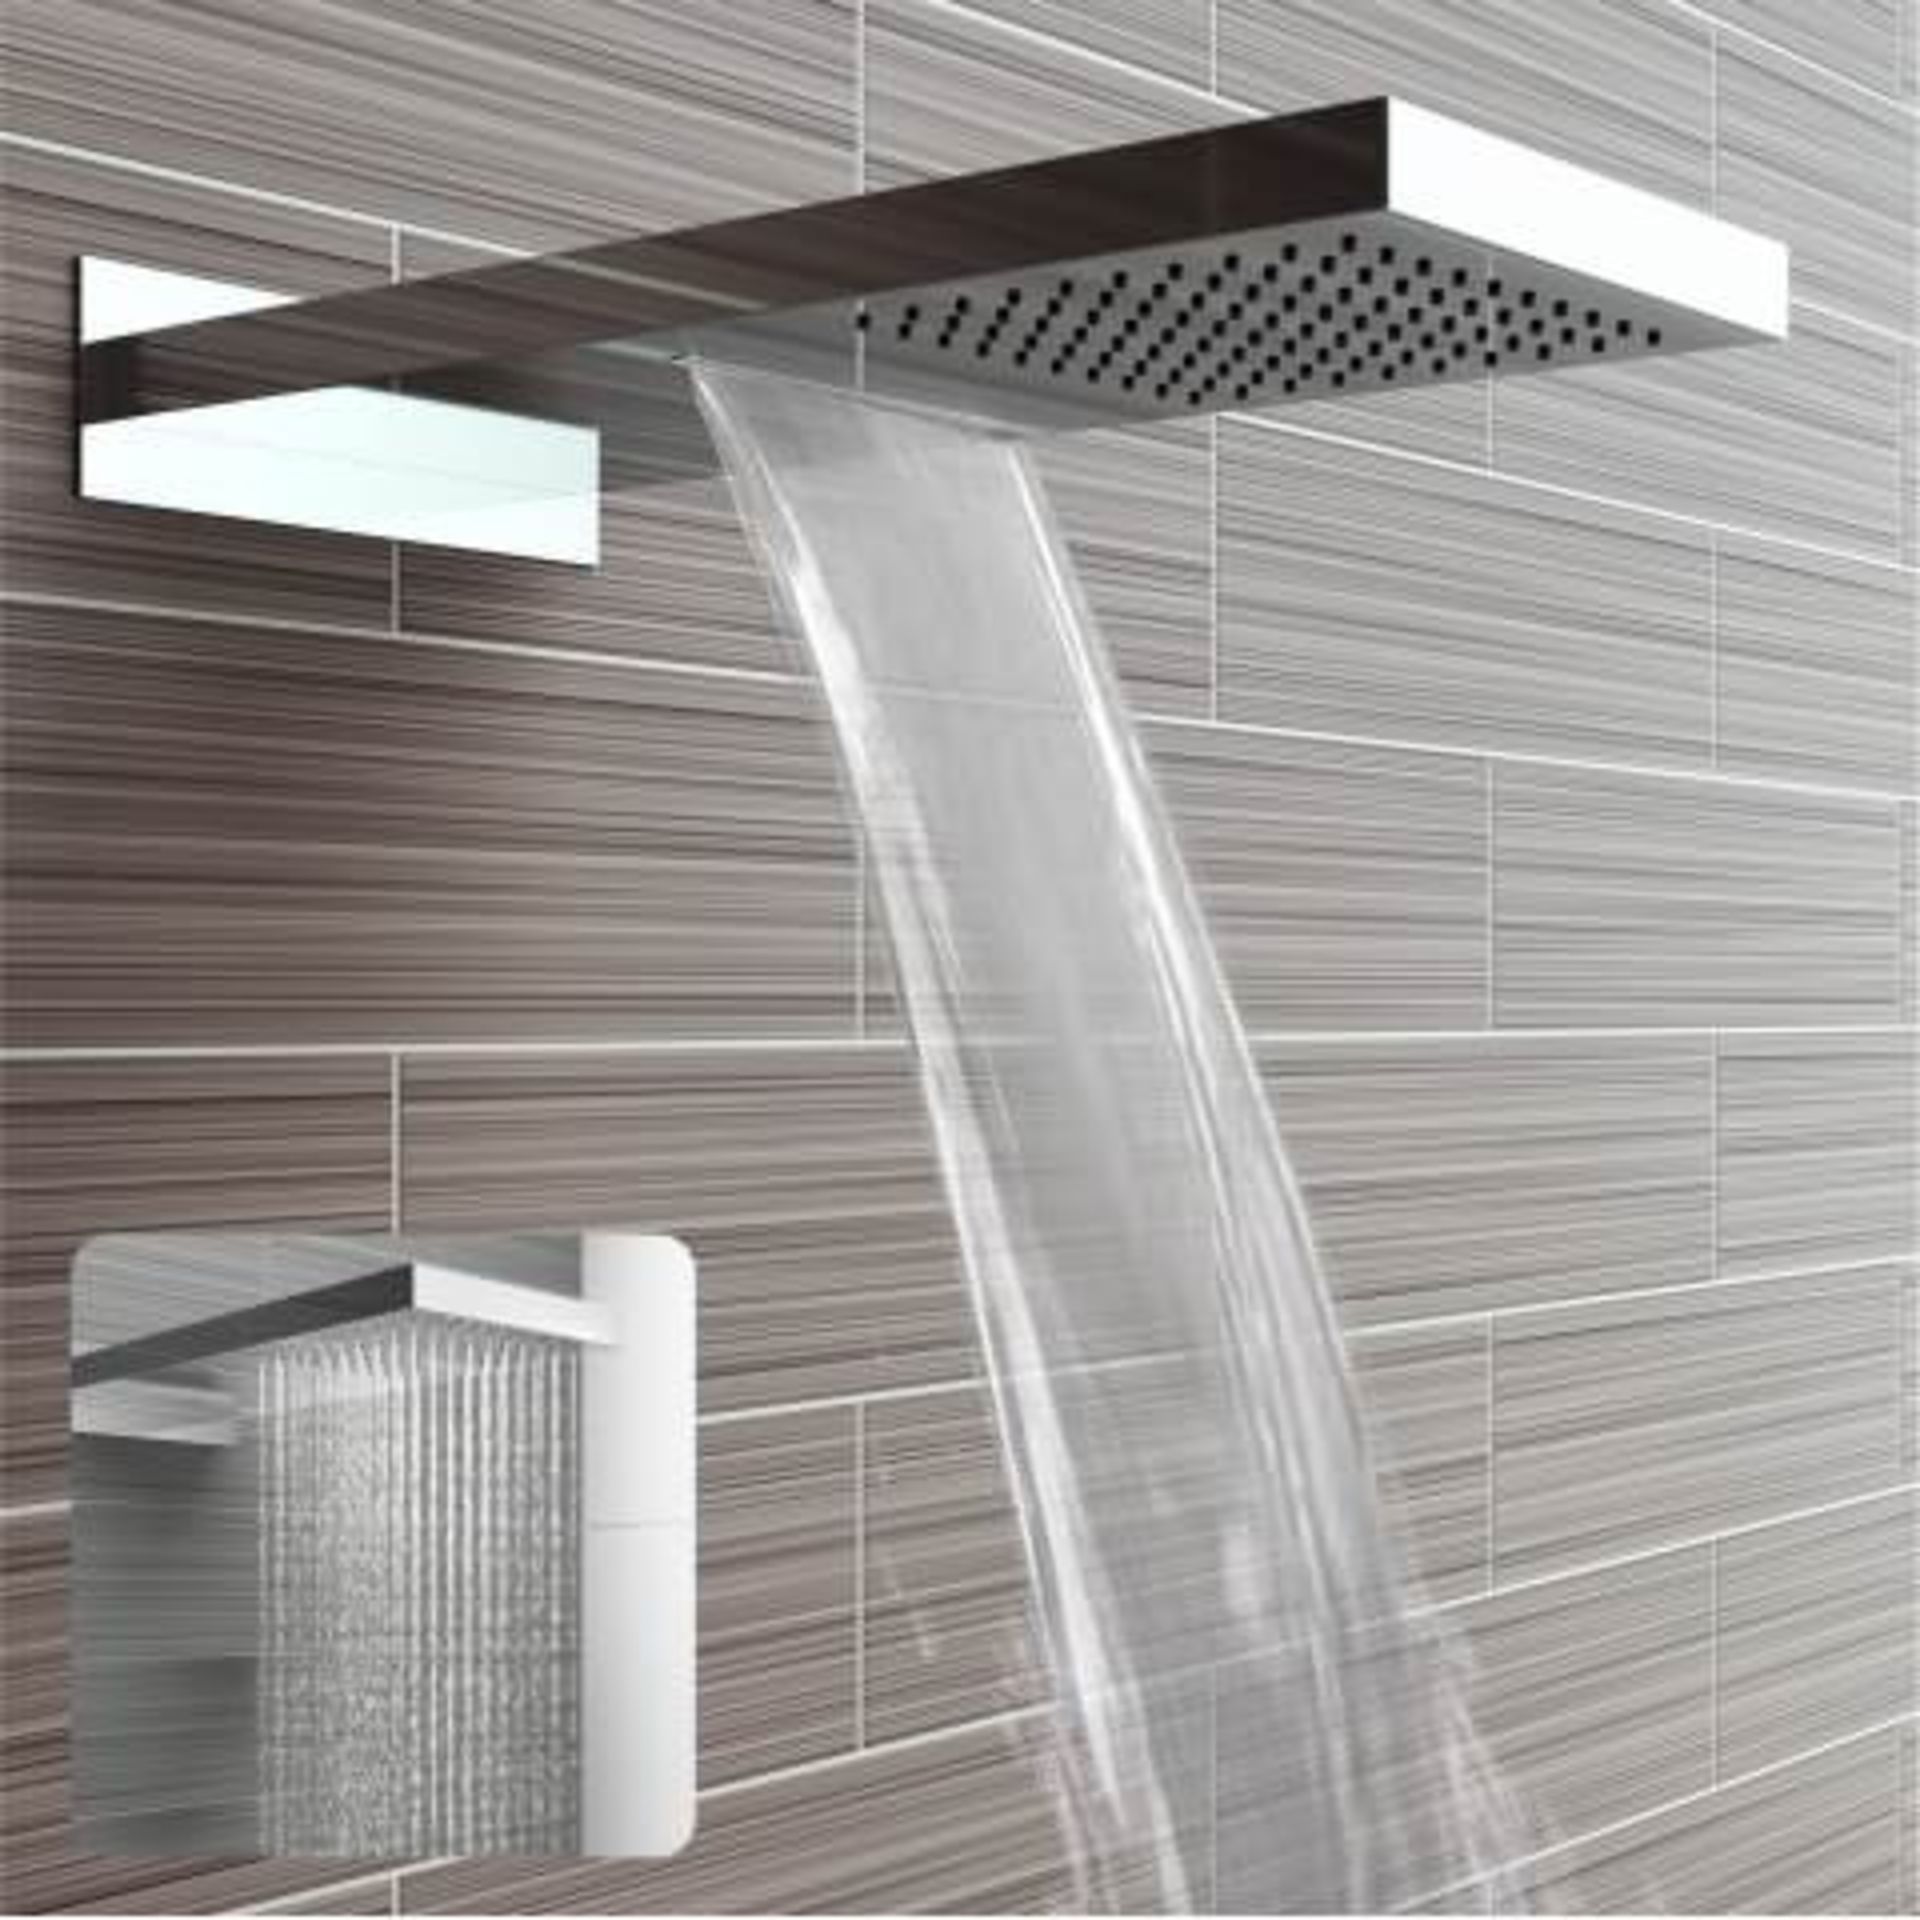 (I22) Stainless Steel 230x500mm Waterfall Shower Head. RRP £374.98. "What An Experience": Enjoy - Image 2 of 5